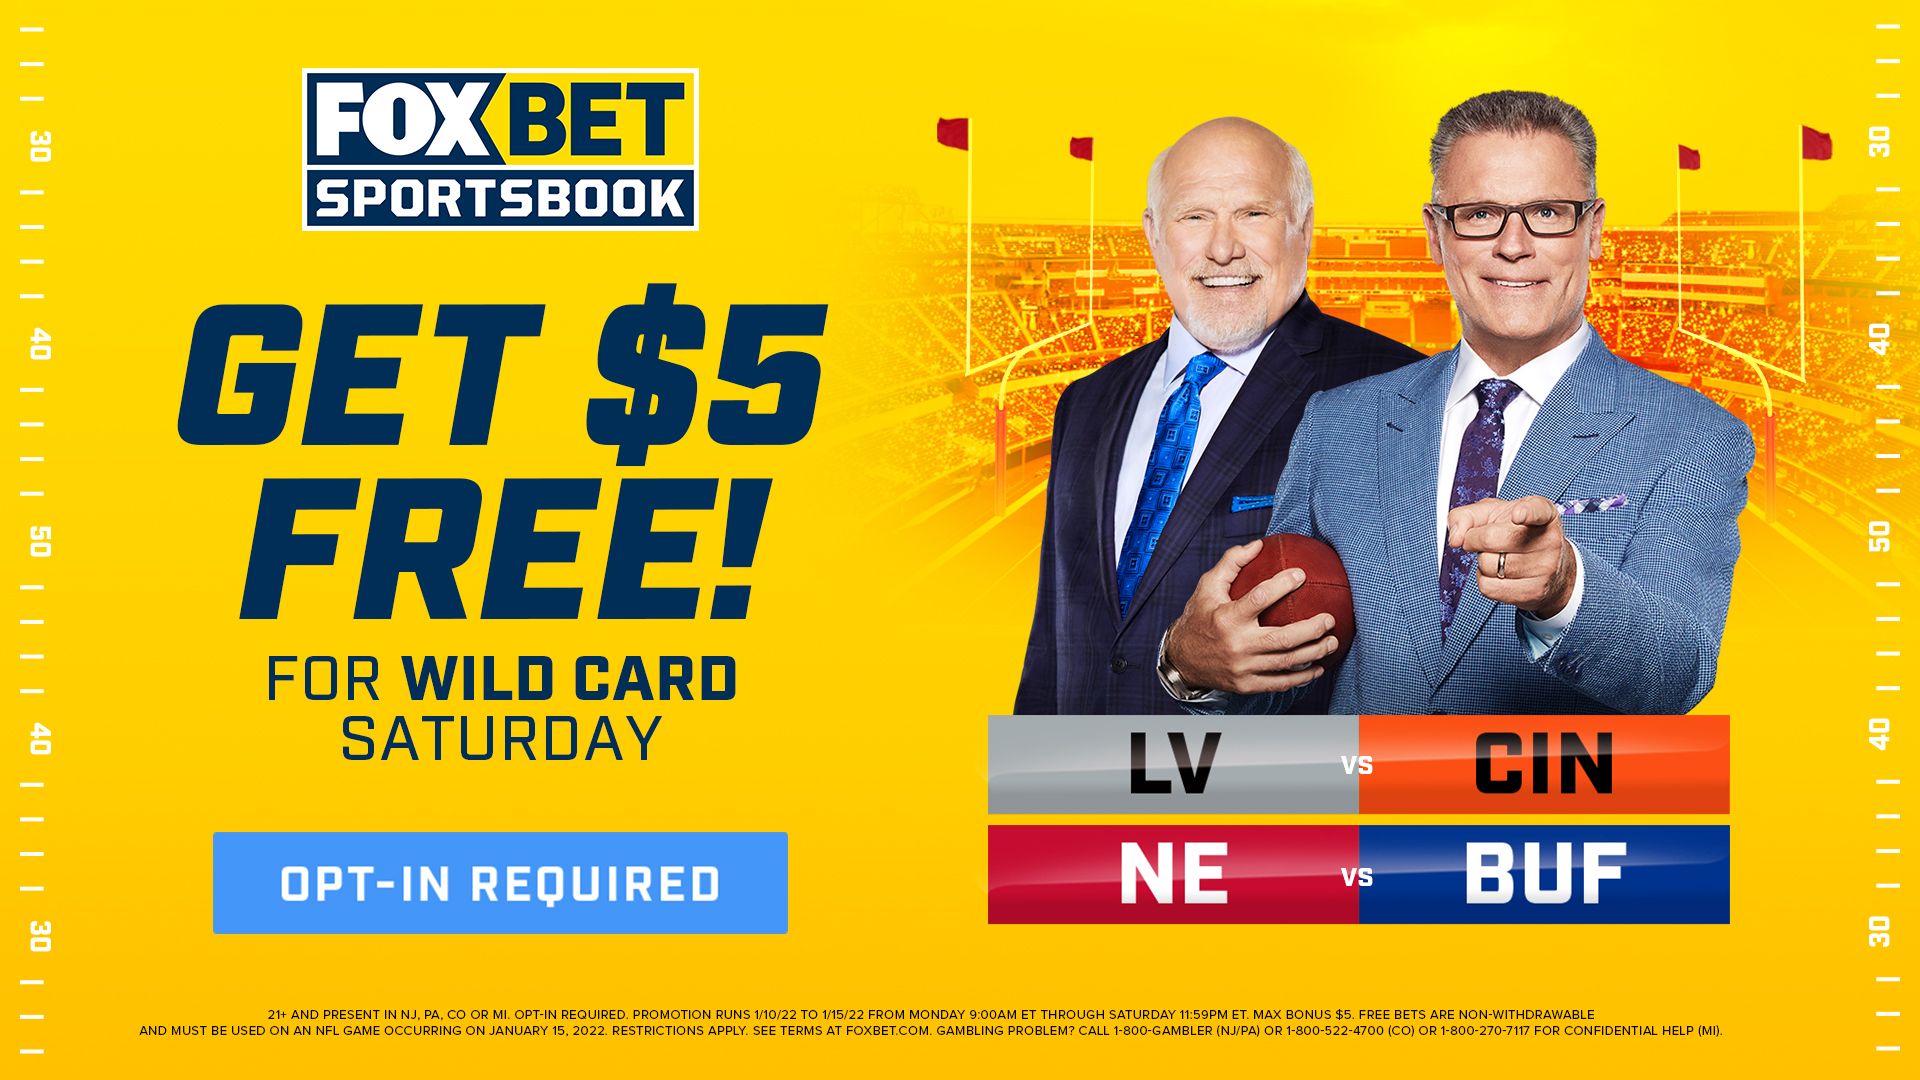 Special Offer: Get a FREE $5 Bet on Saturday's Wild Card Games! (FOX Bet)